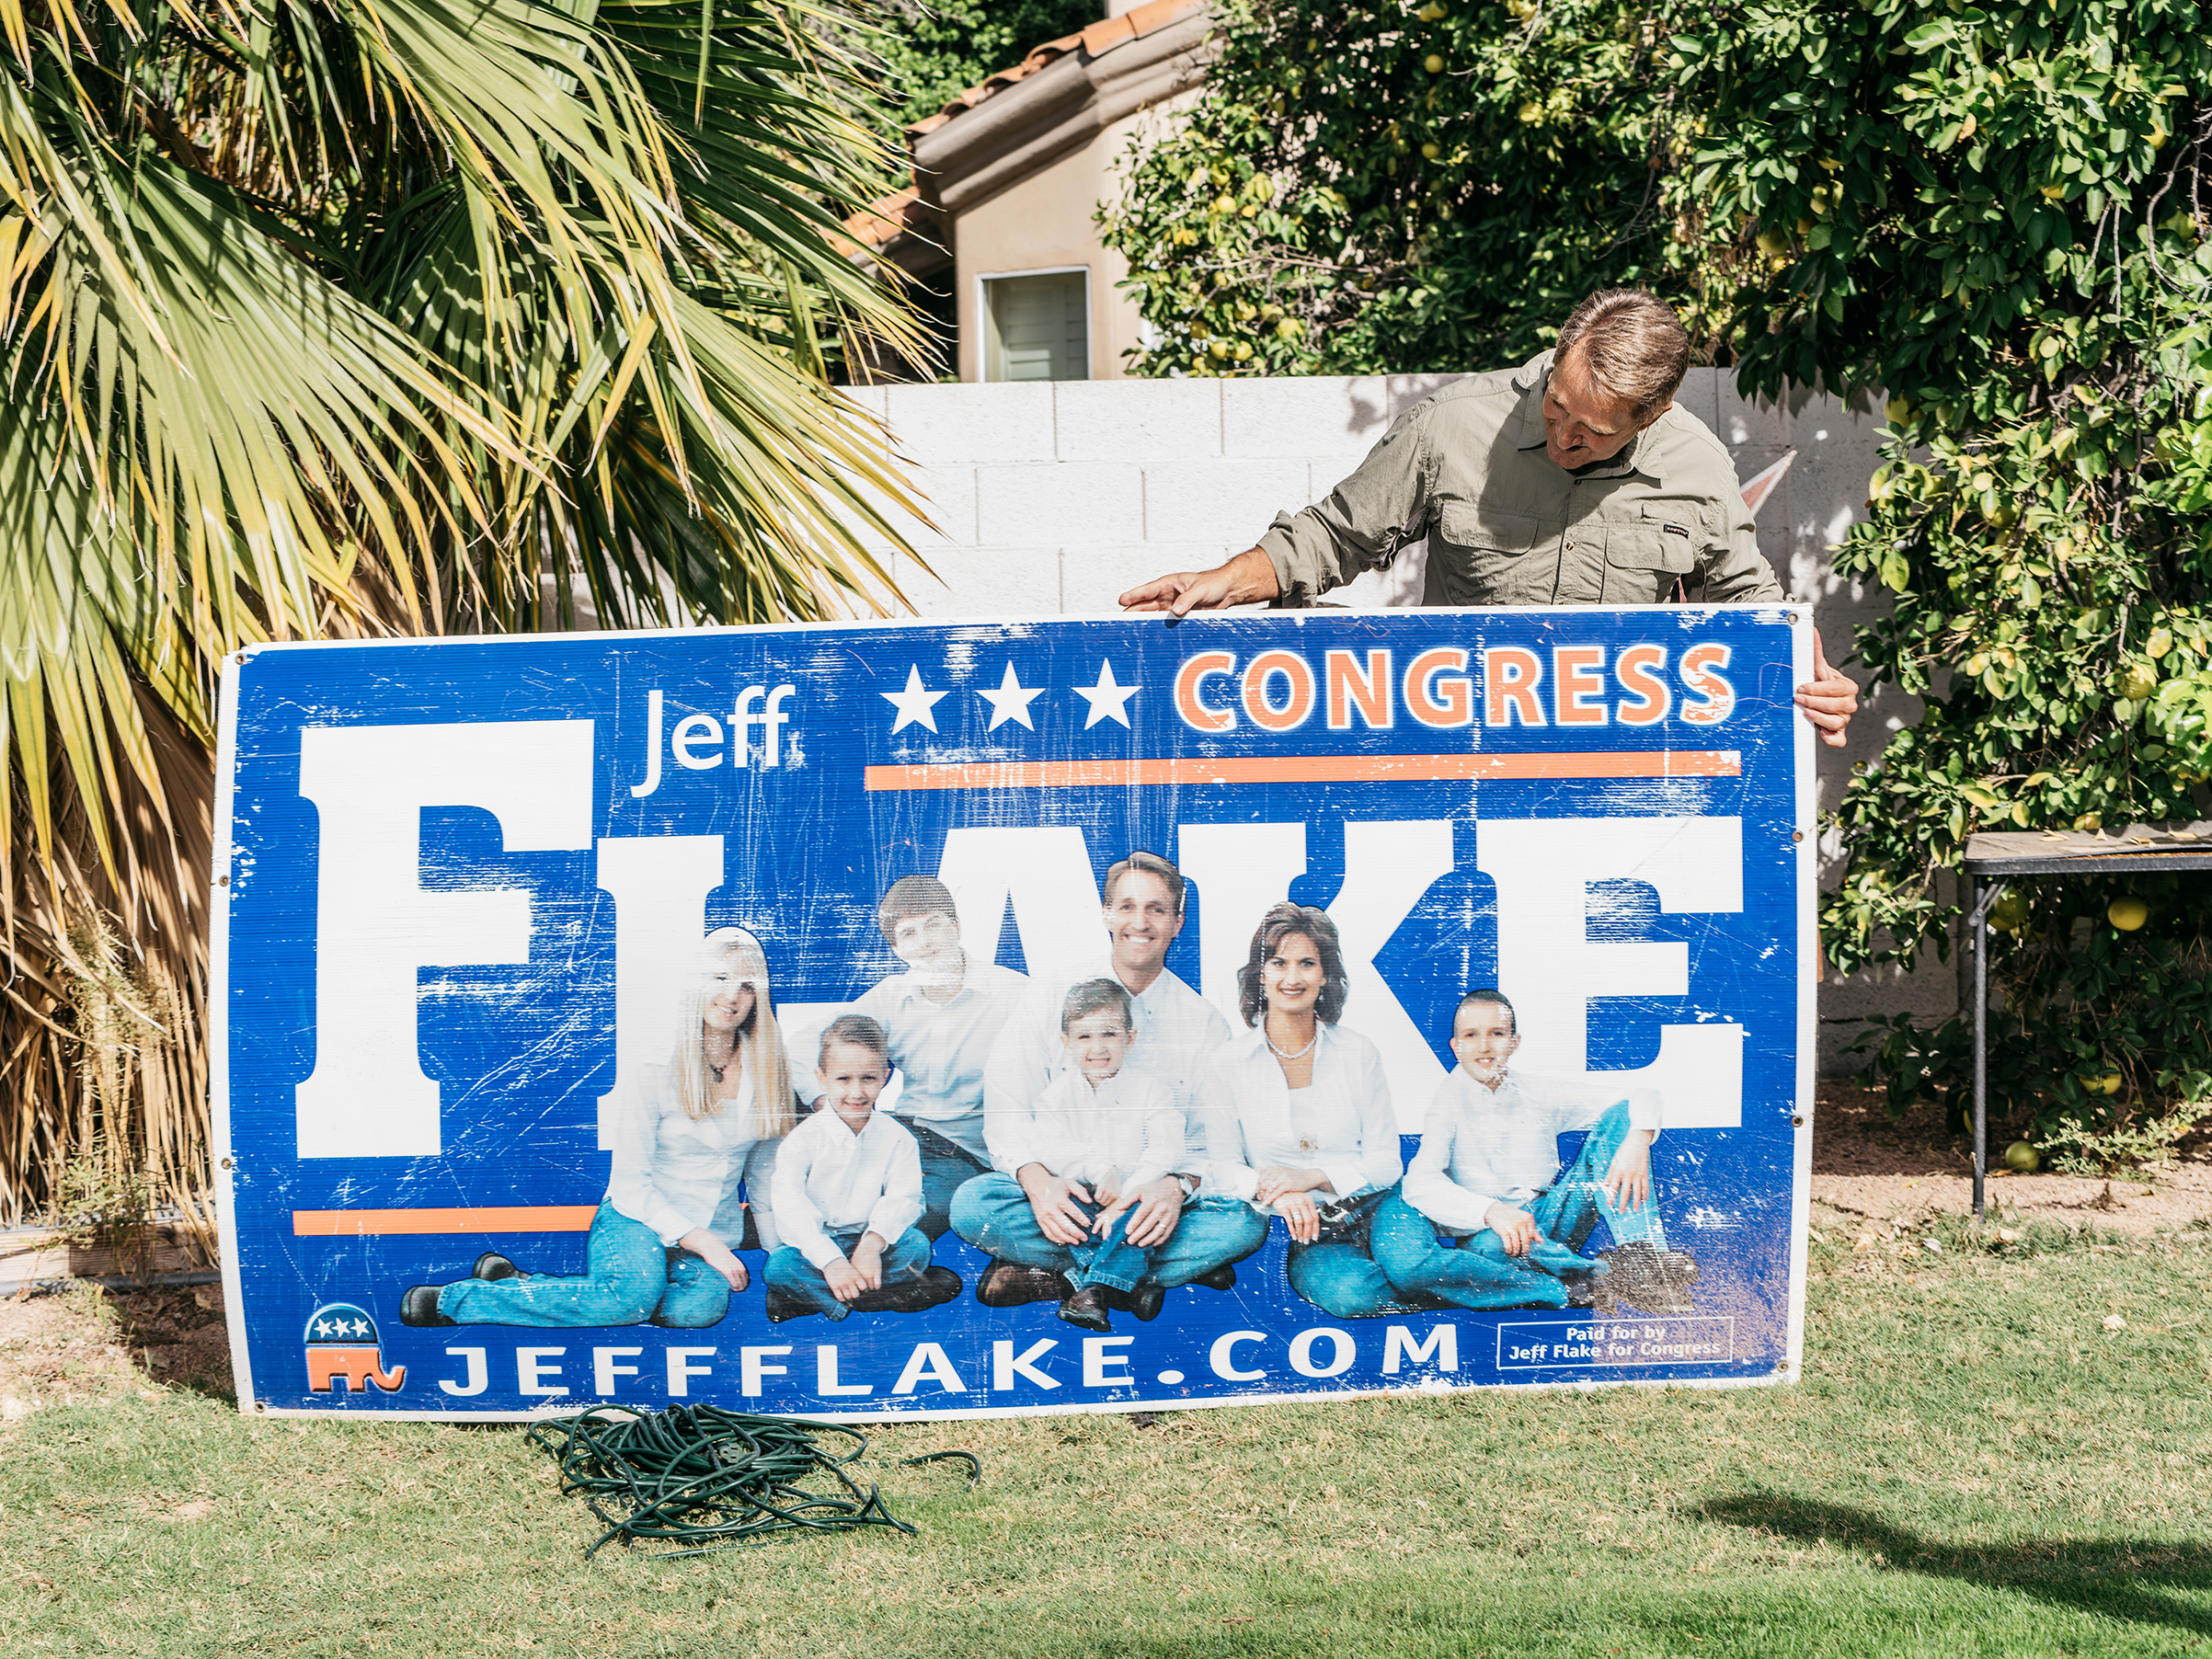 Flake holds an old campaign sign in his backyard, Mesa, Ariz. (Michael Friberg for TIME)